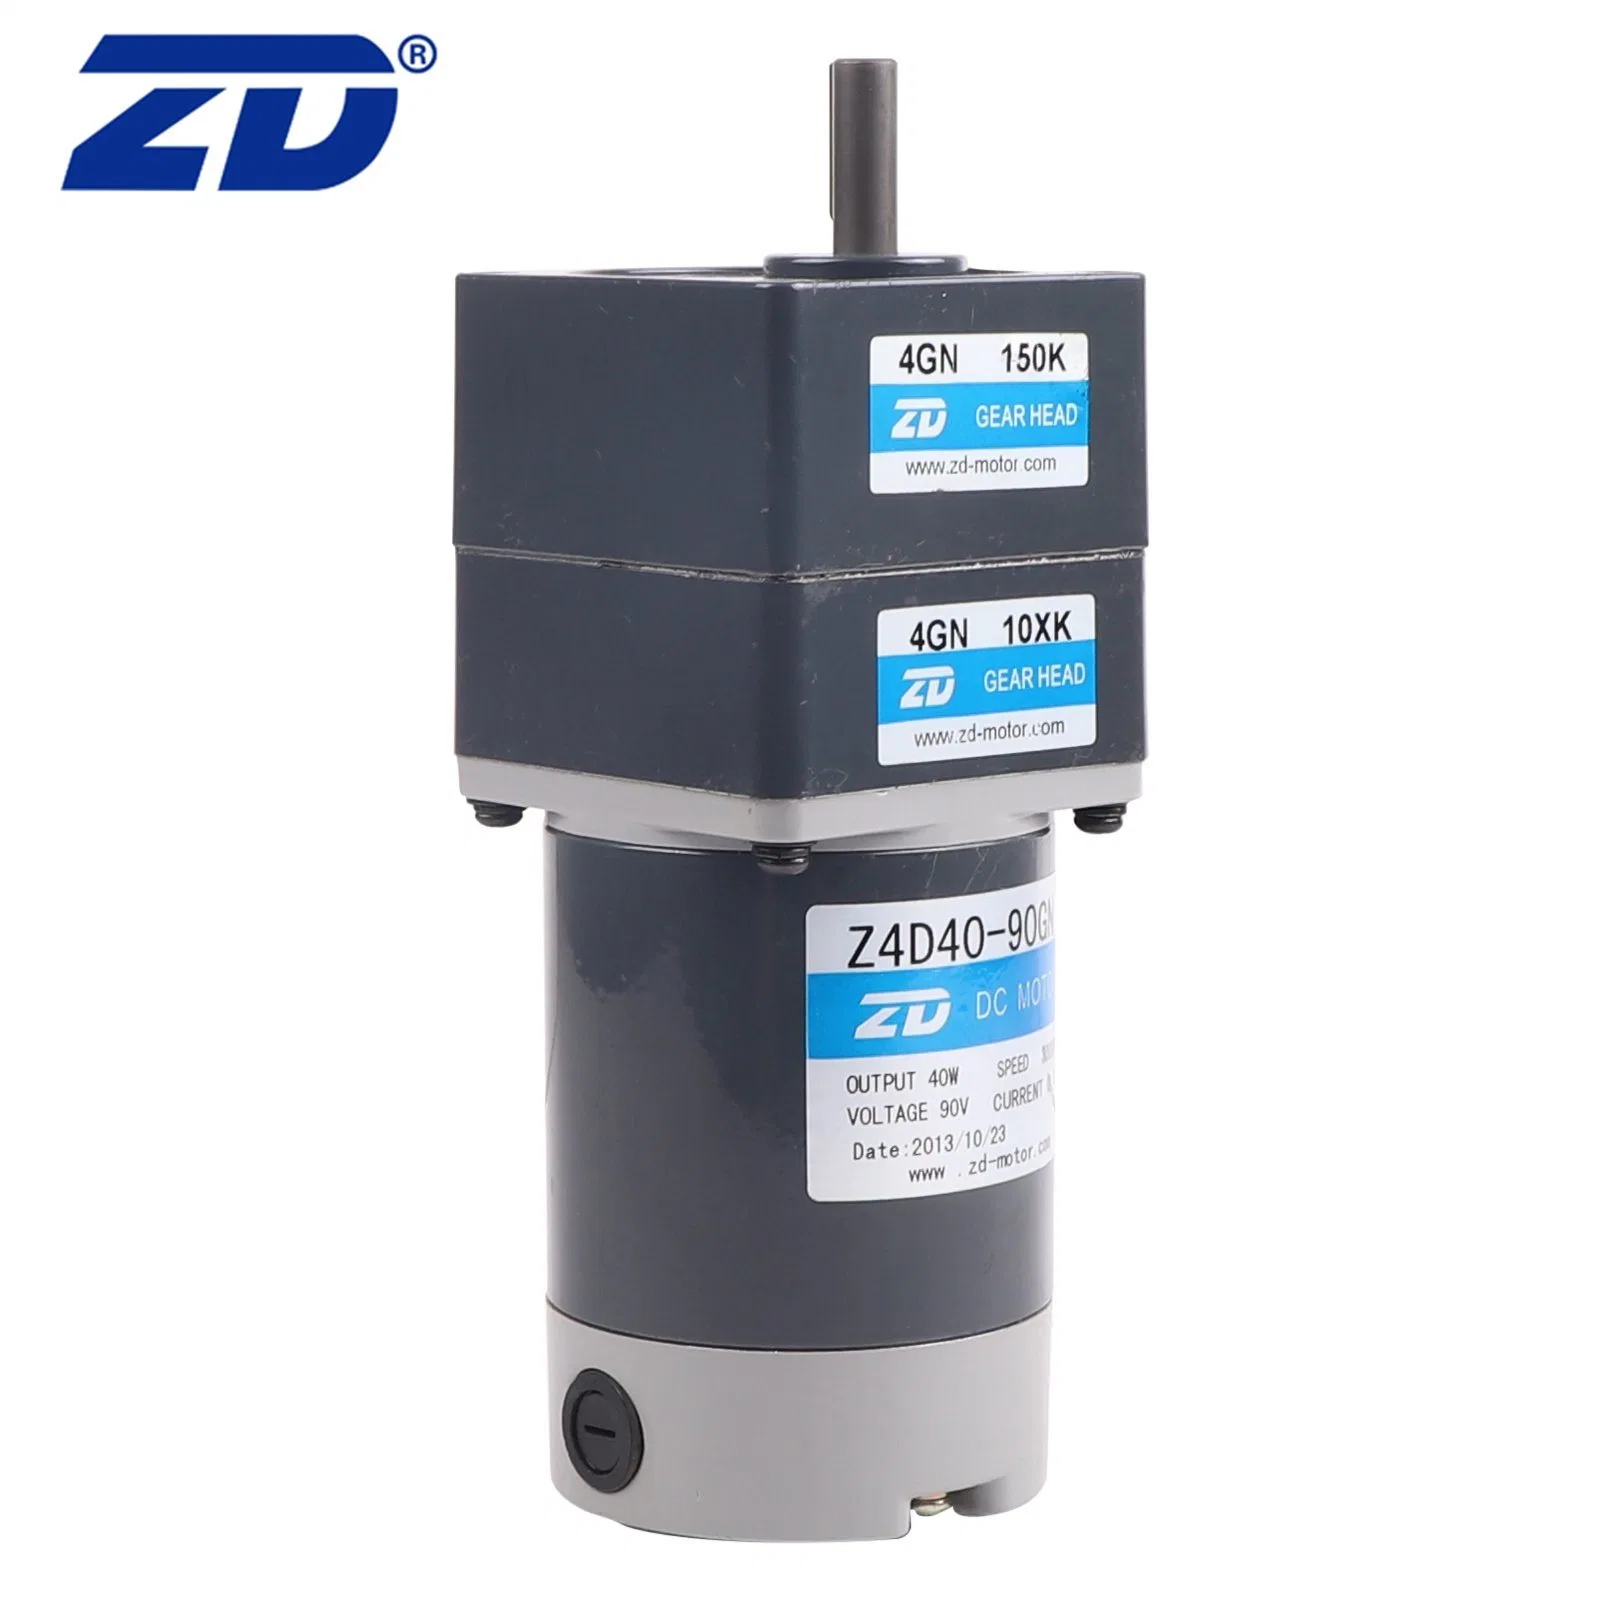 ZD Regular Square Case gearbox UL, CE, ISO9001, CCC, RoHS Approved Right Angle Electric Brush Gear Motor